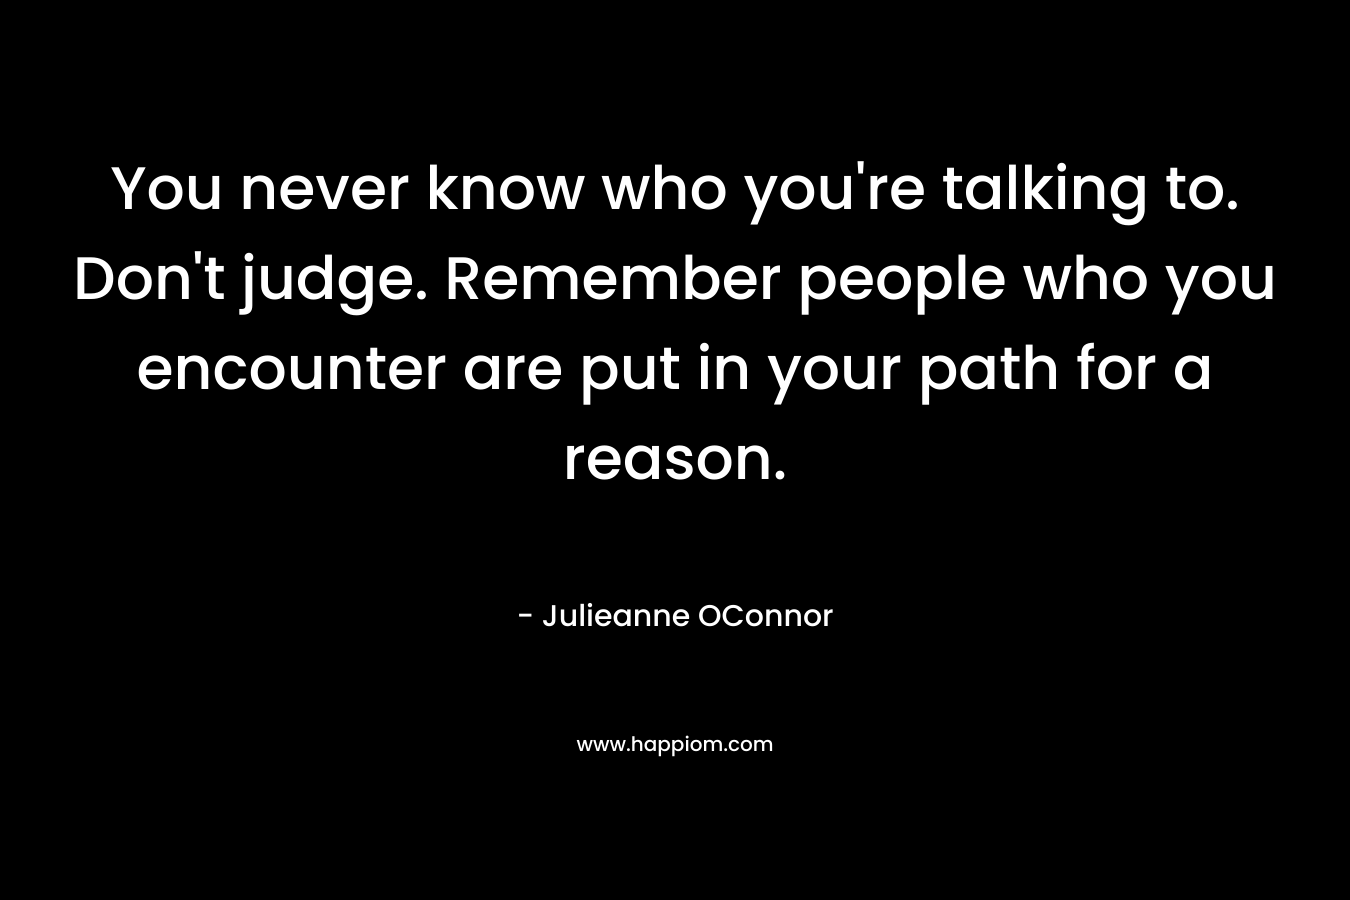 You never know who you're talking to. Don't judge. Remember people who you encounter are put in your path for a reason.